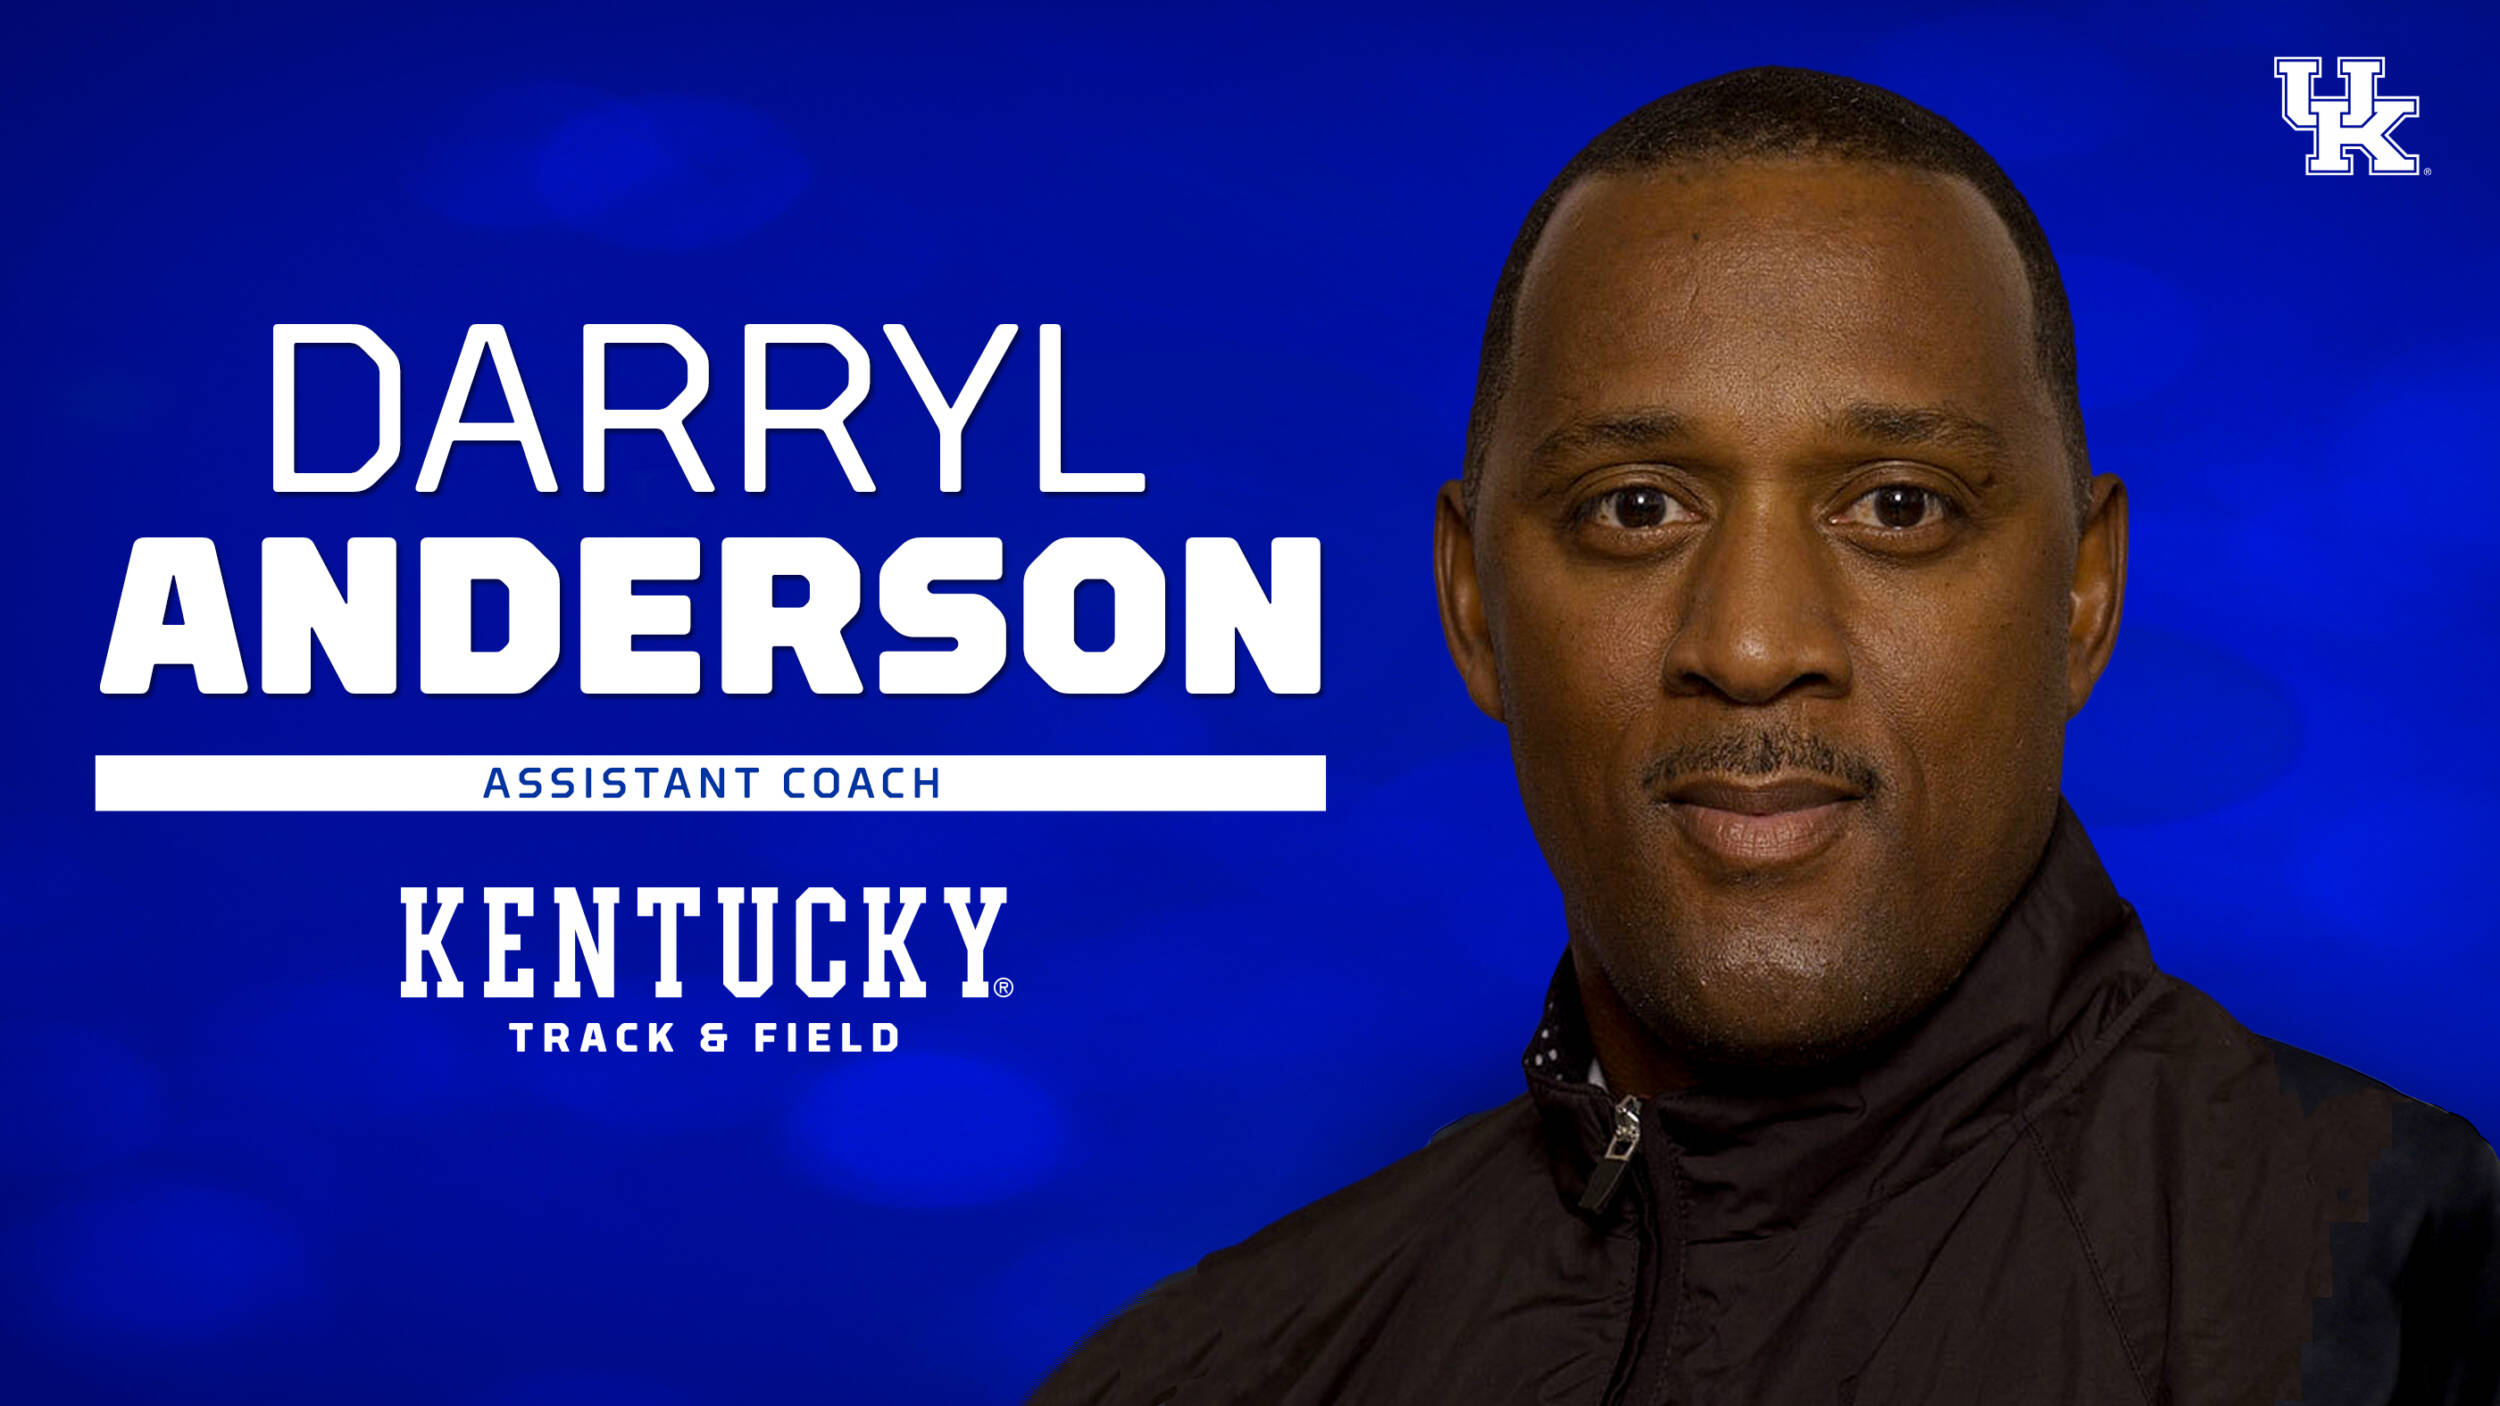 Darryl Anderson Hired as Kentucky Track & Field Assistant Coach